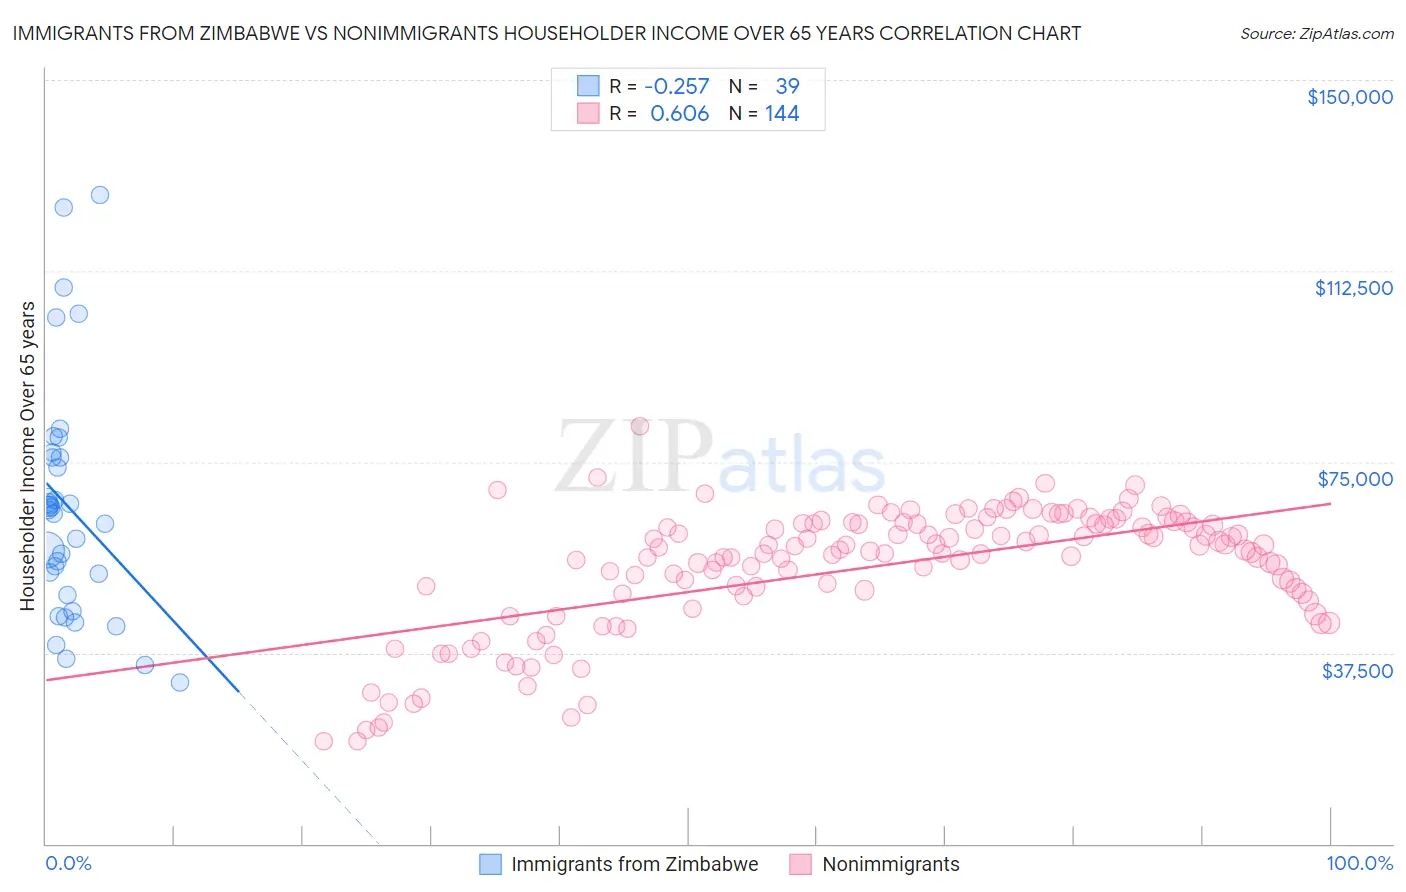 Immigrants from Zimbabwe vs Nonimmigrants Householder Income Over 65 years